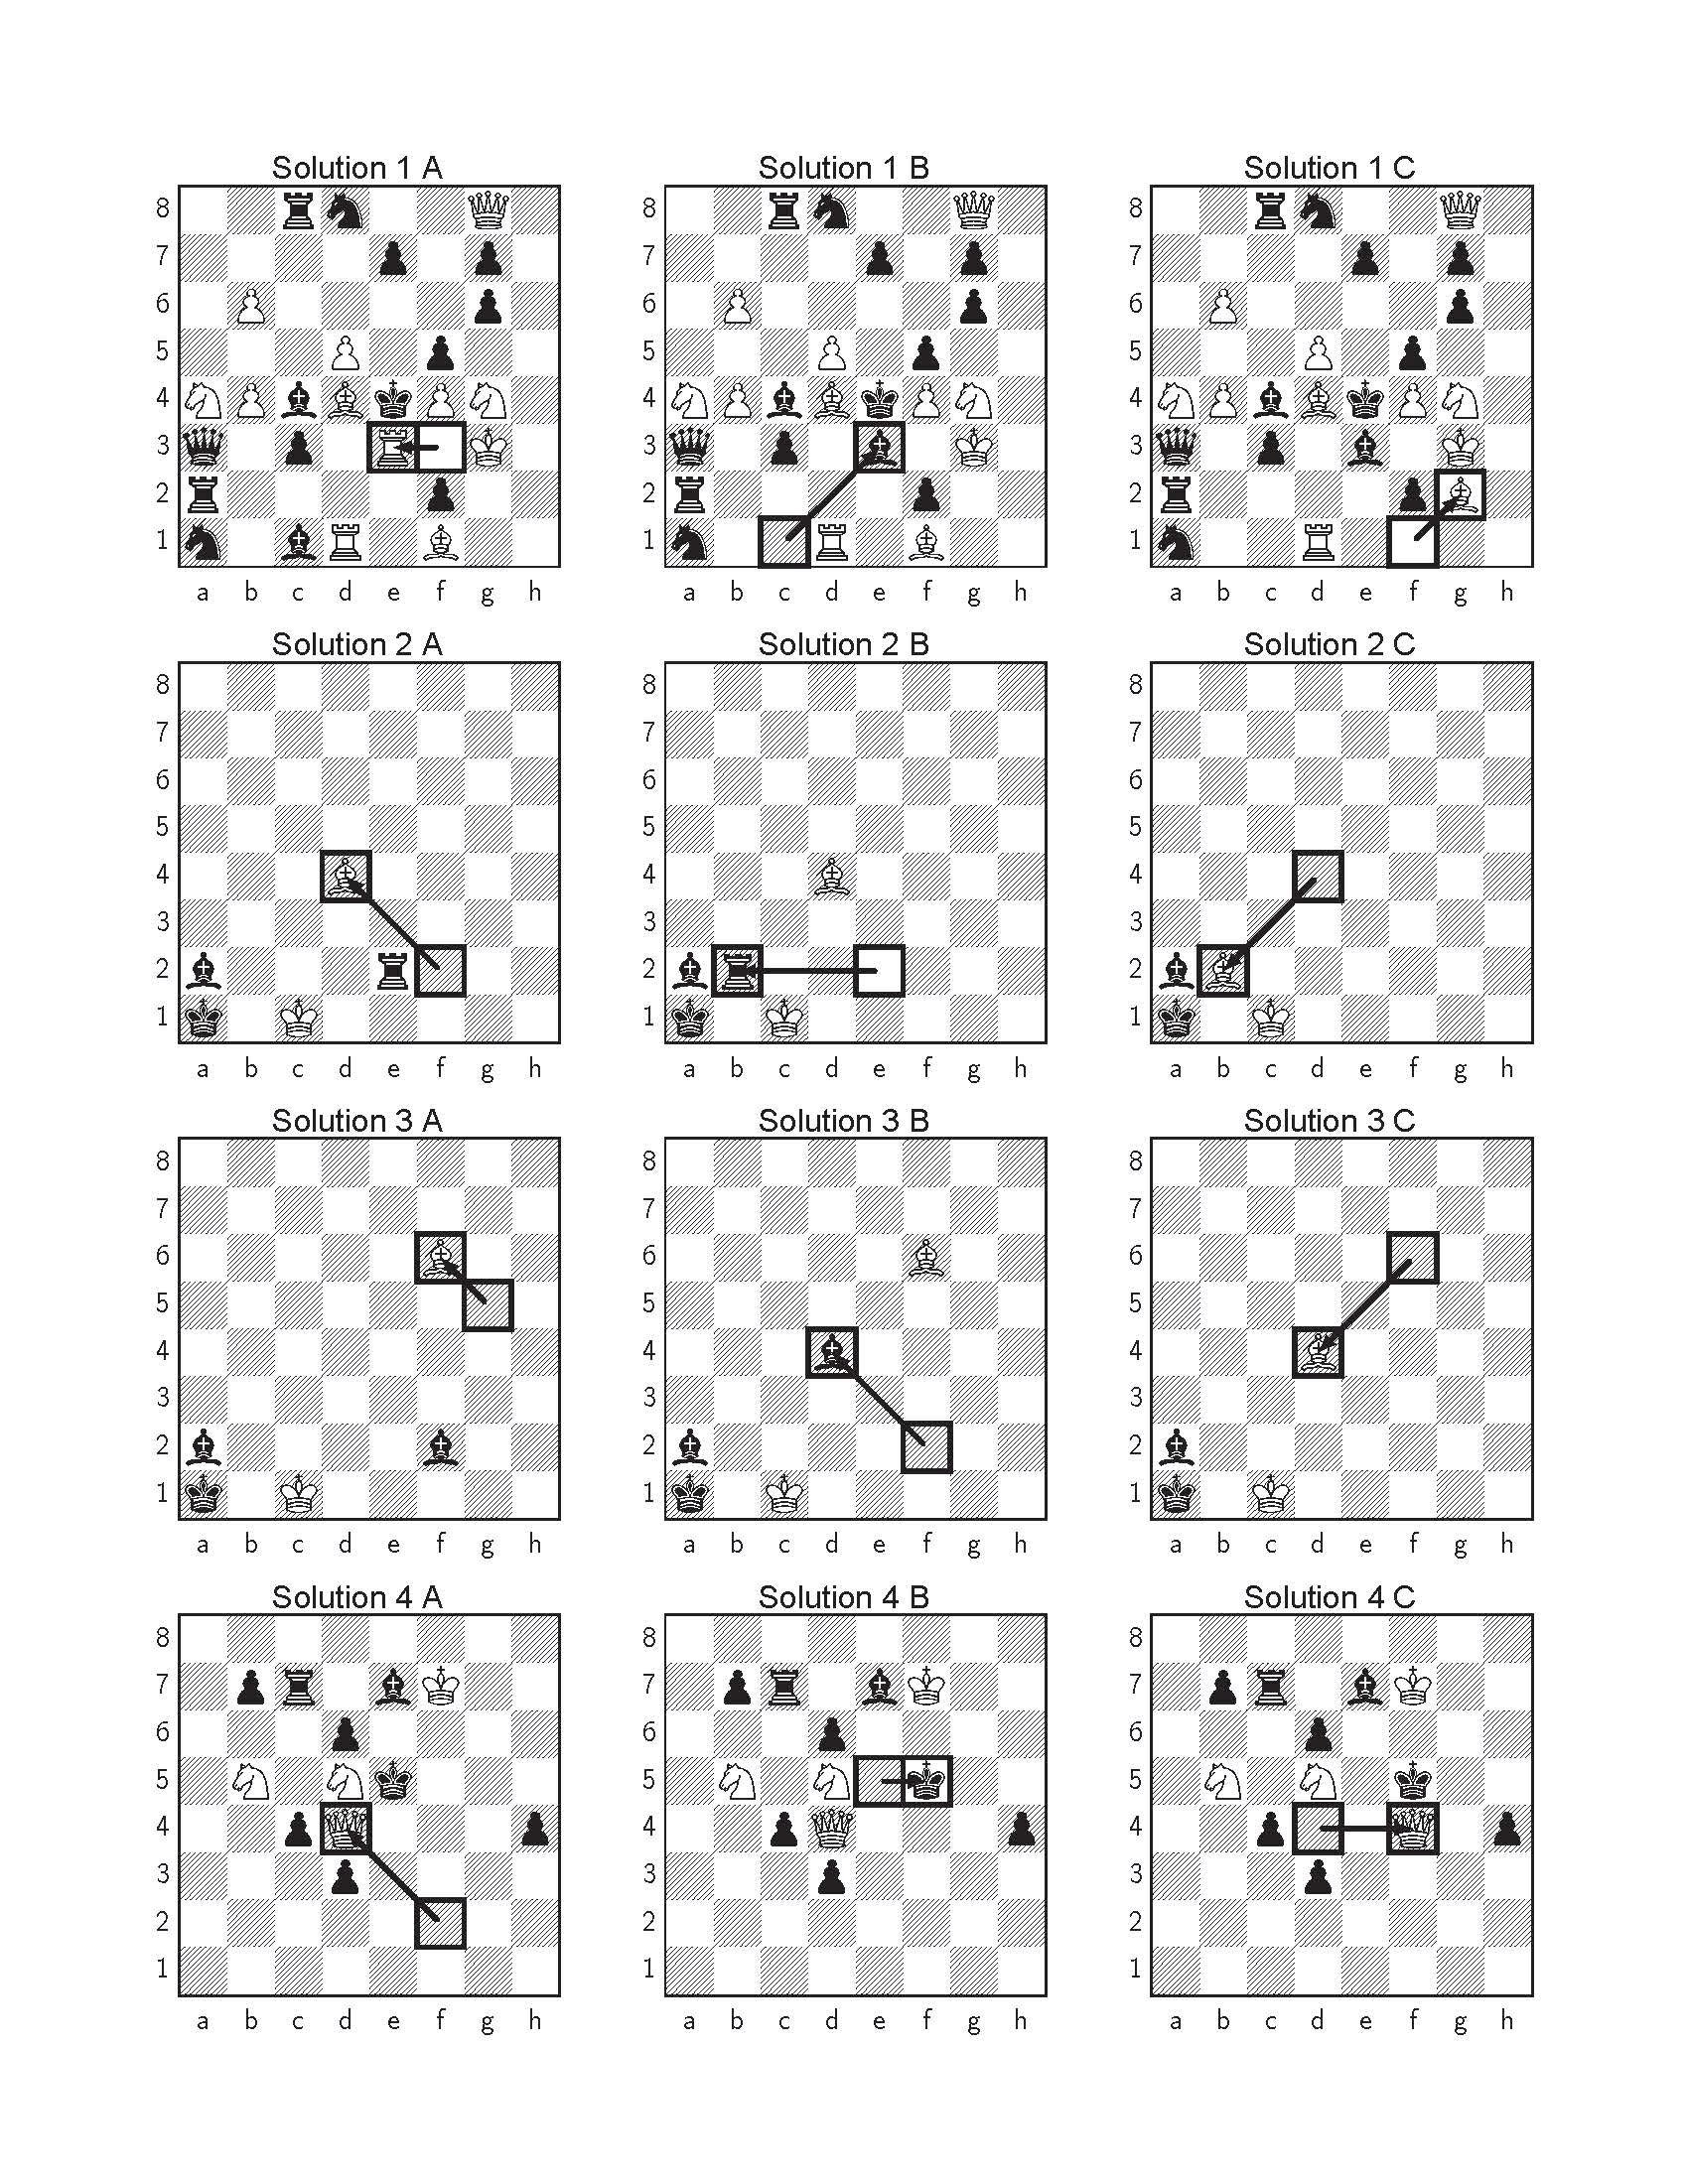 1200 Medium Chess Puzzles in Two Moves Graphic by PrintablePDFStore ·  Creative Fabrica